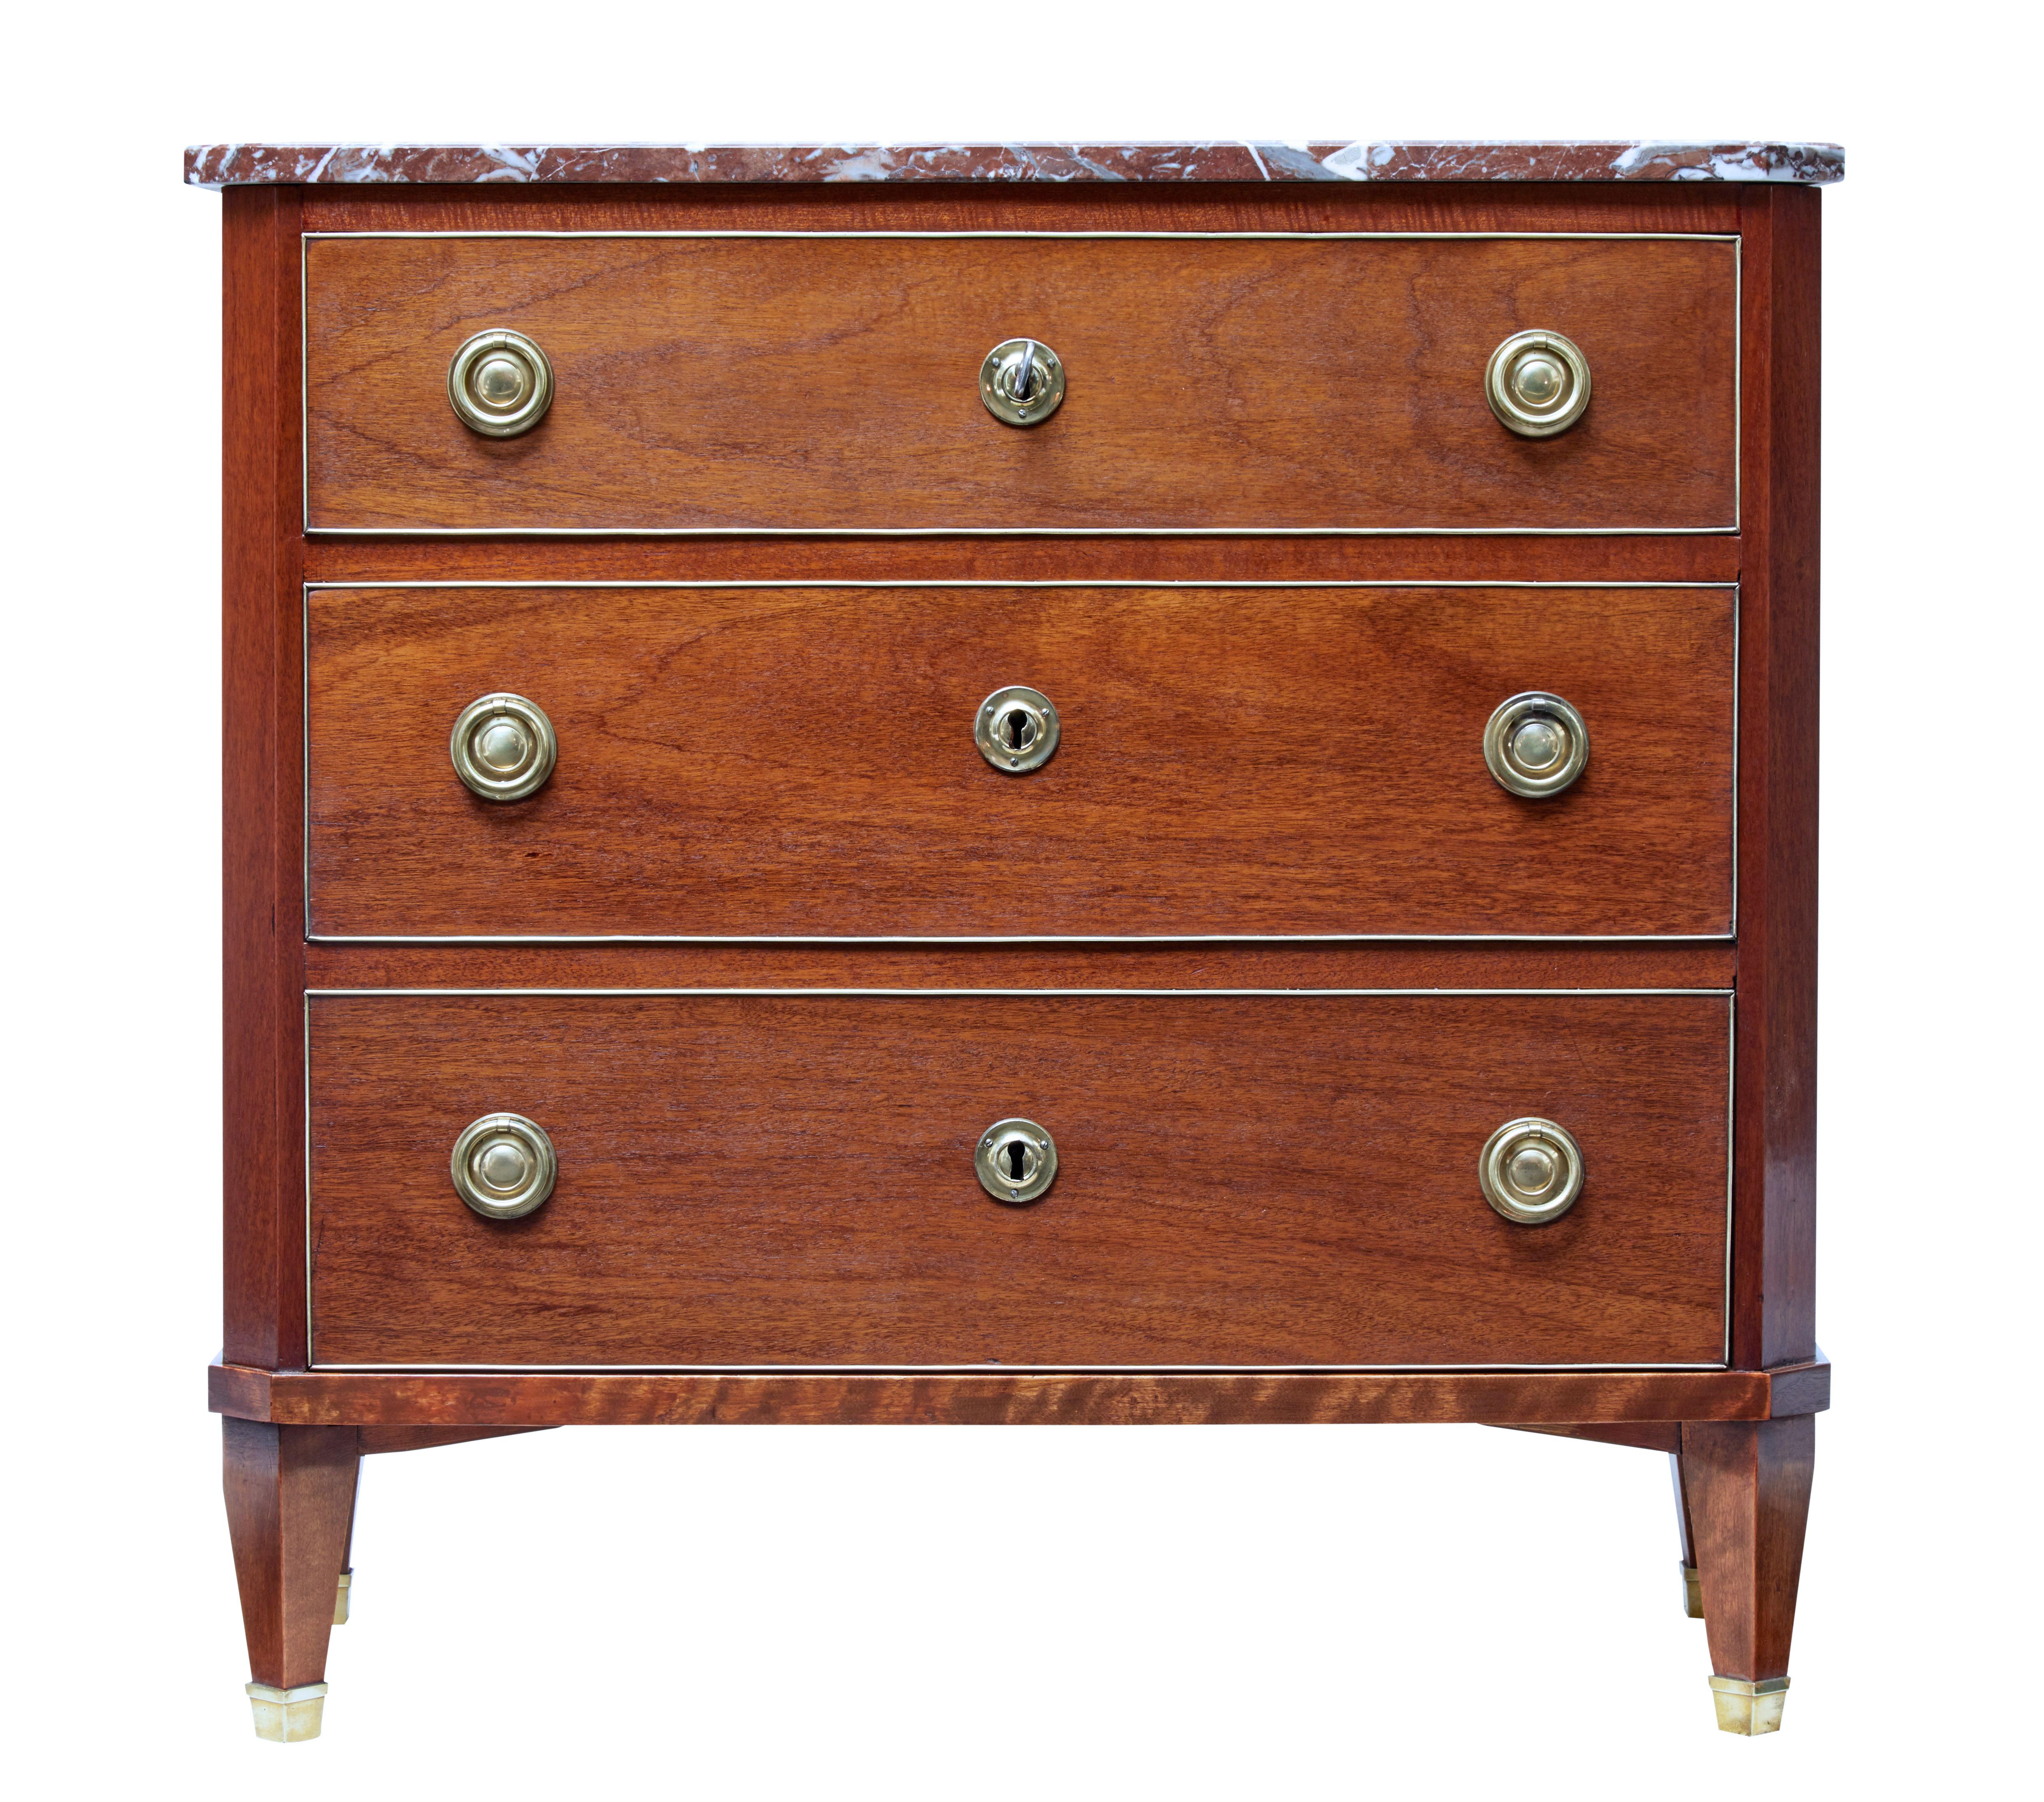 Elegant 19th century chest of drawers in the Directoire taste, circa 1880.

3 brass edged drawers with brass ring handles and escutheons.

Original marble top, which can be glued into place if desired.

Standing on tapered legs with brass